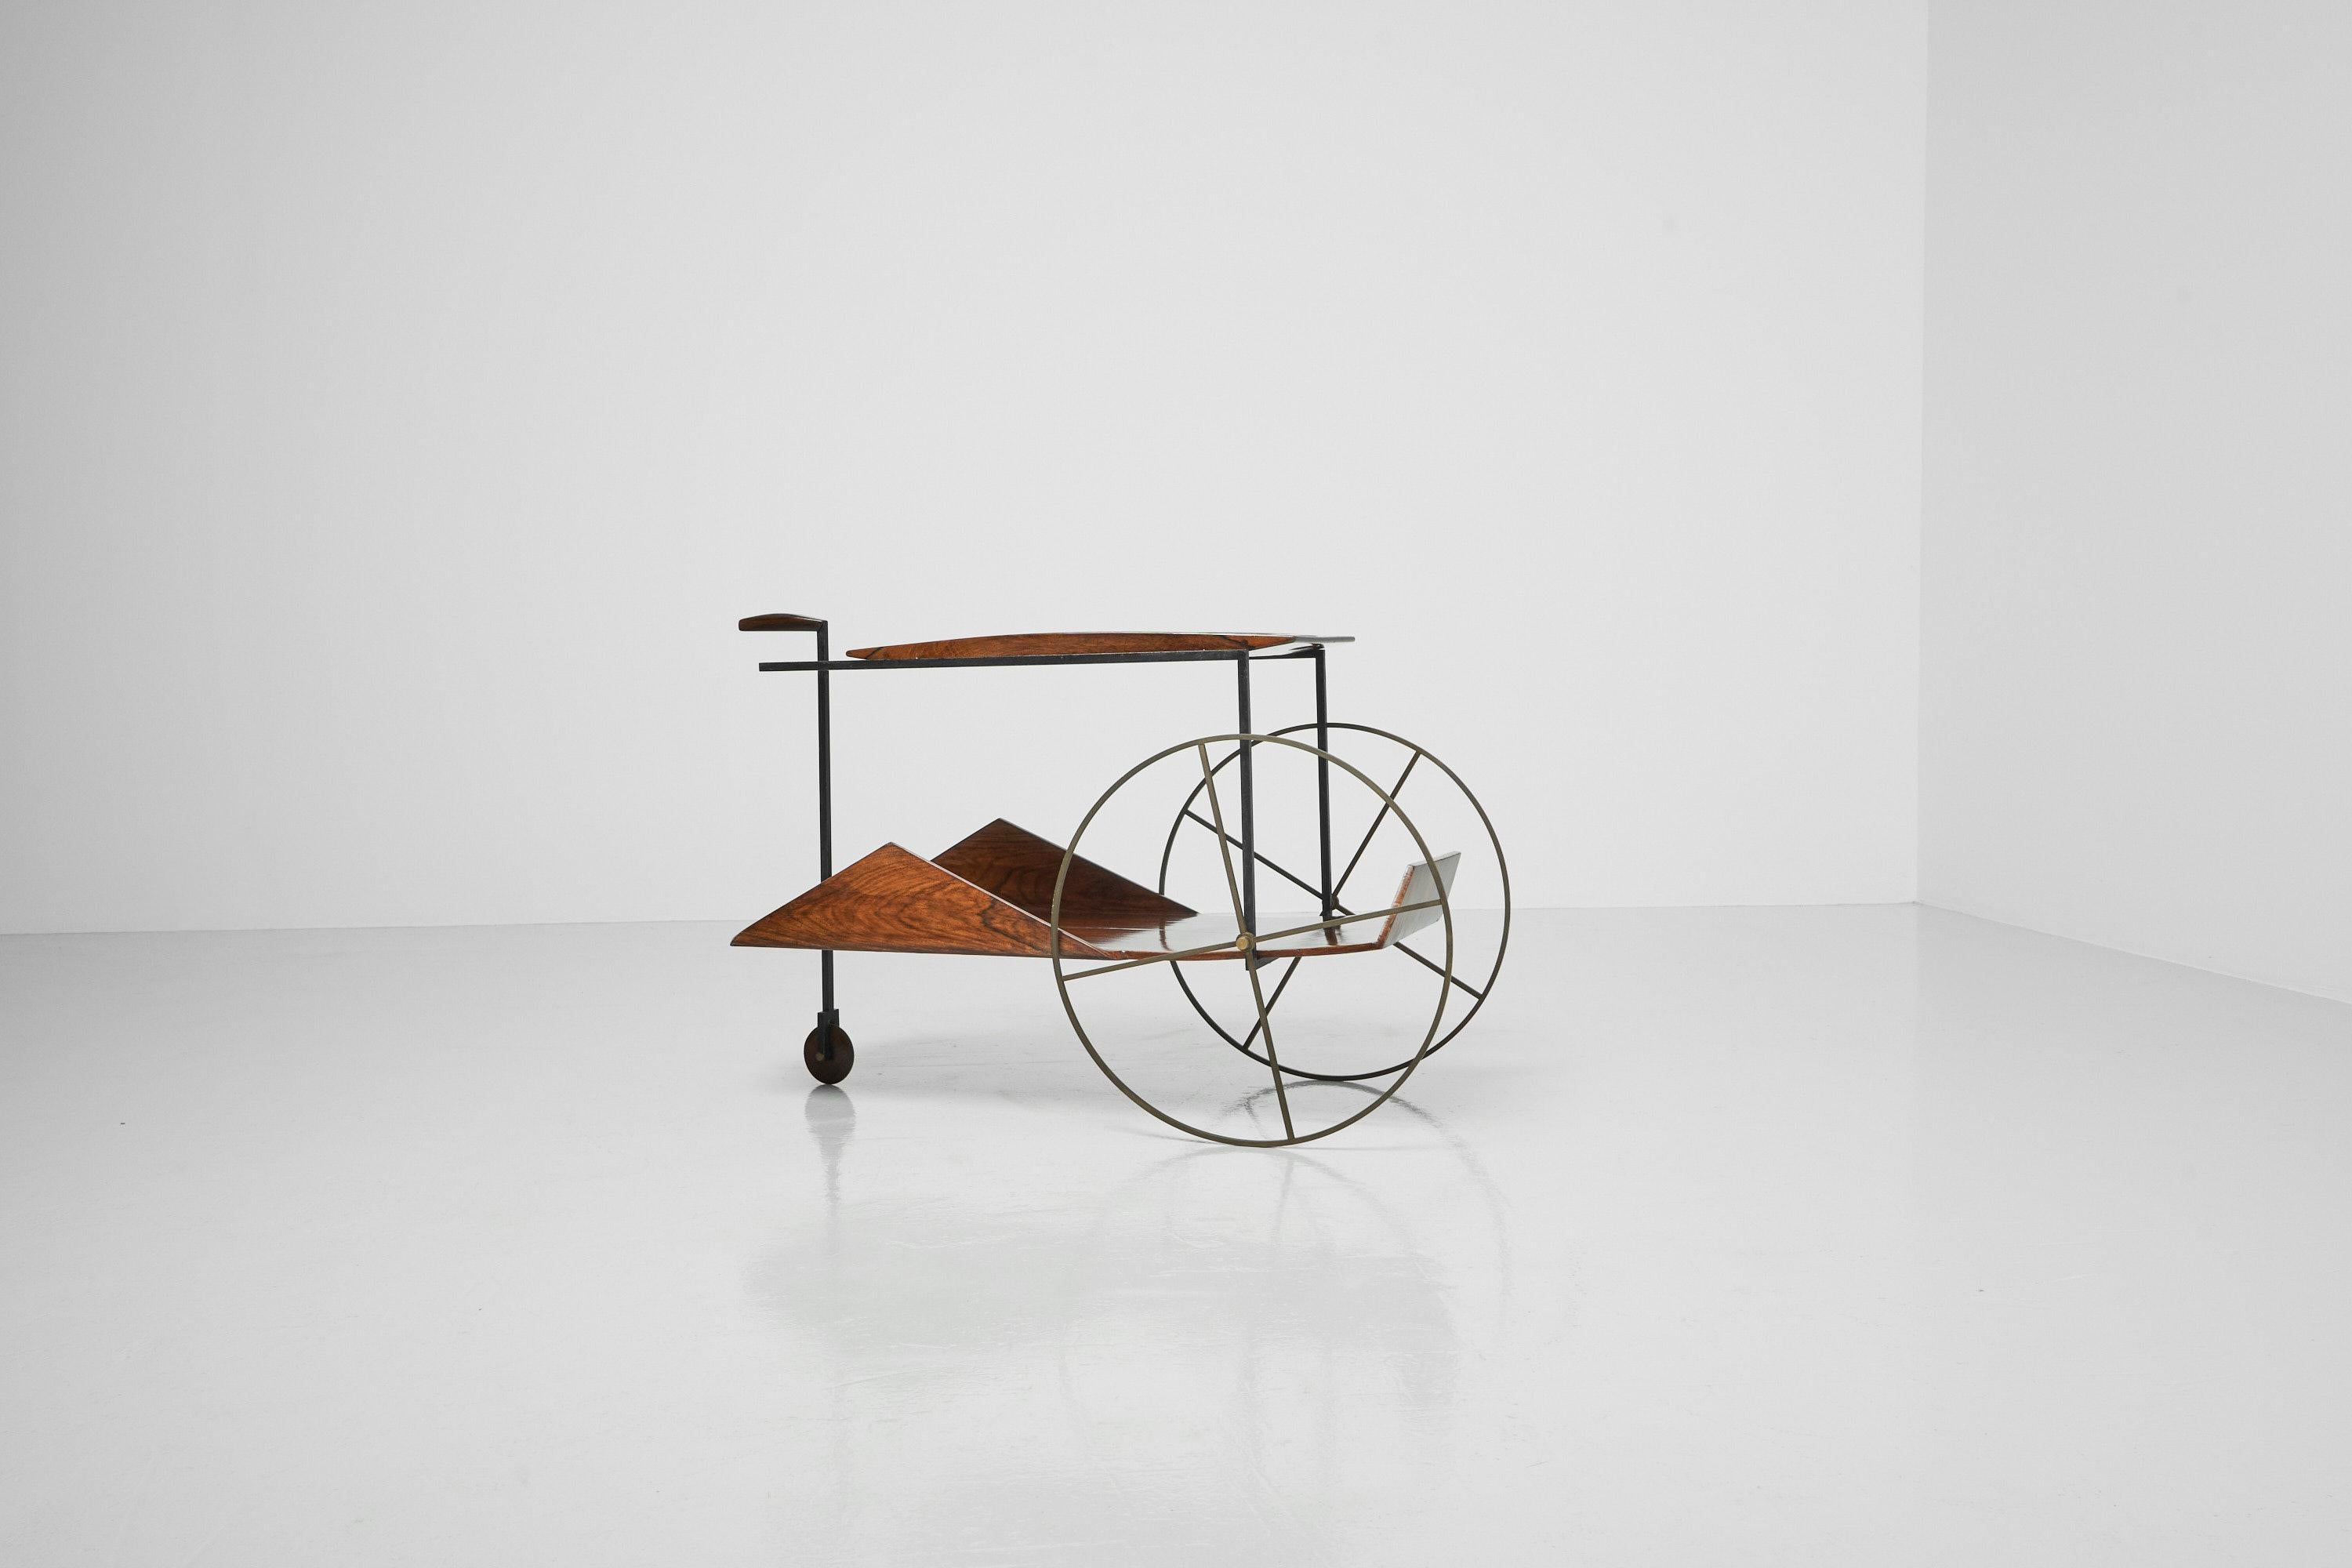 This stunning trolley is probably the most iconic piece designed by Jorge Zalszupin and manufactured in his own company L’Atelier, Brazil 1959. The Carrinho de Chá or tea trolley originates from 1959 and is considered a timeless classic amongst